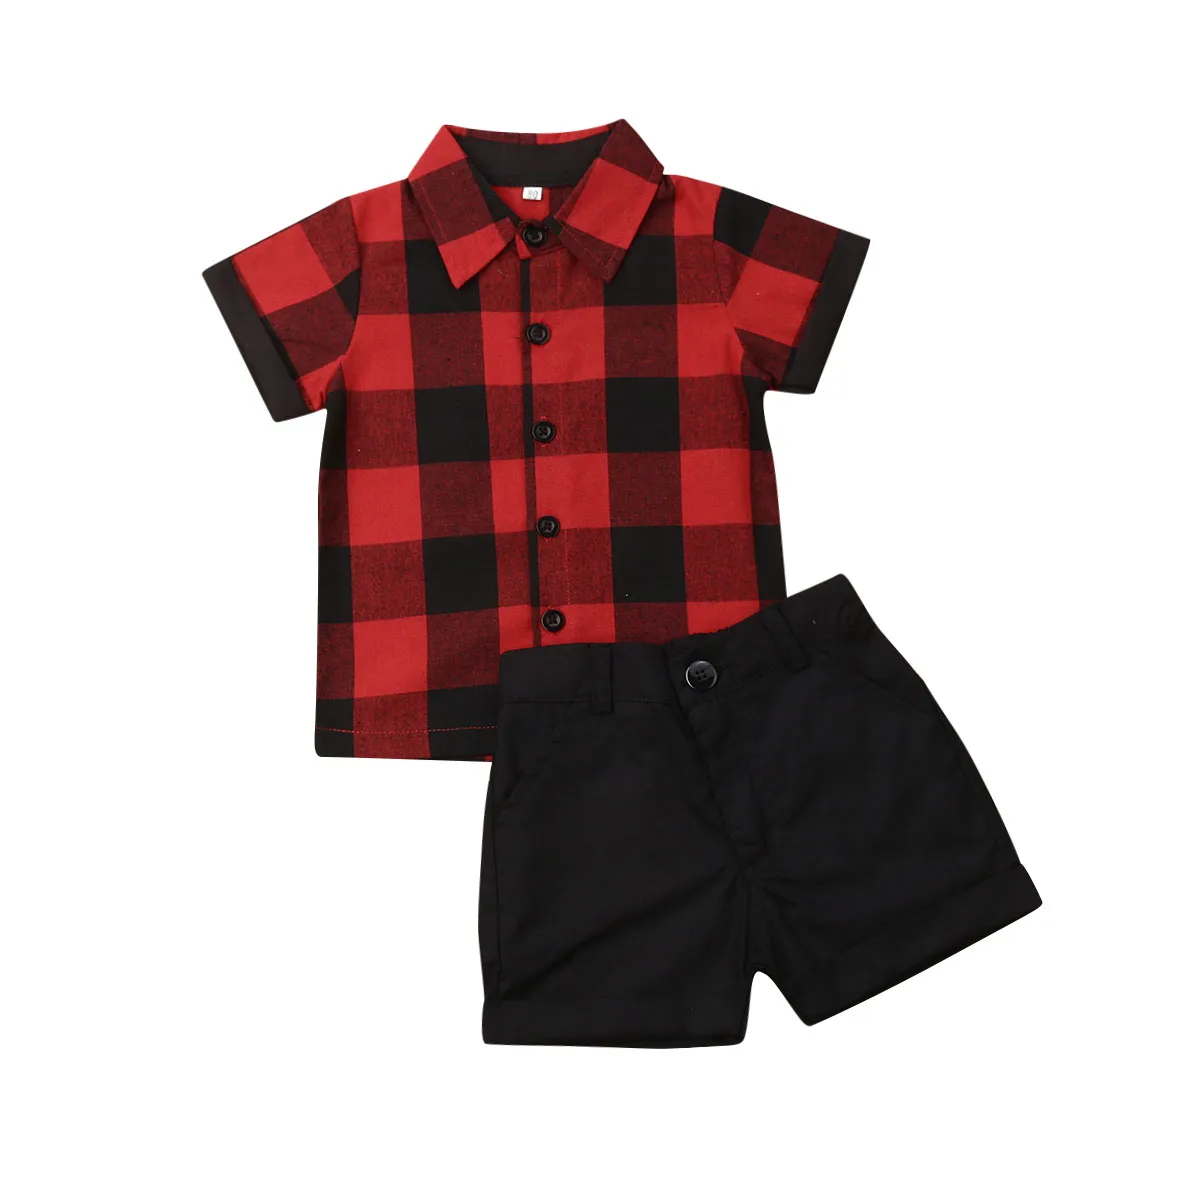 red and black plaid t shirt